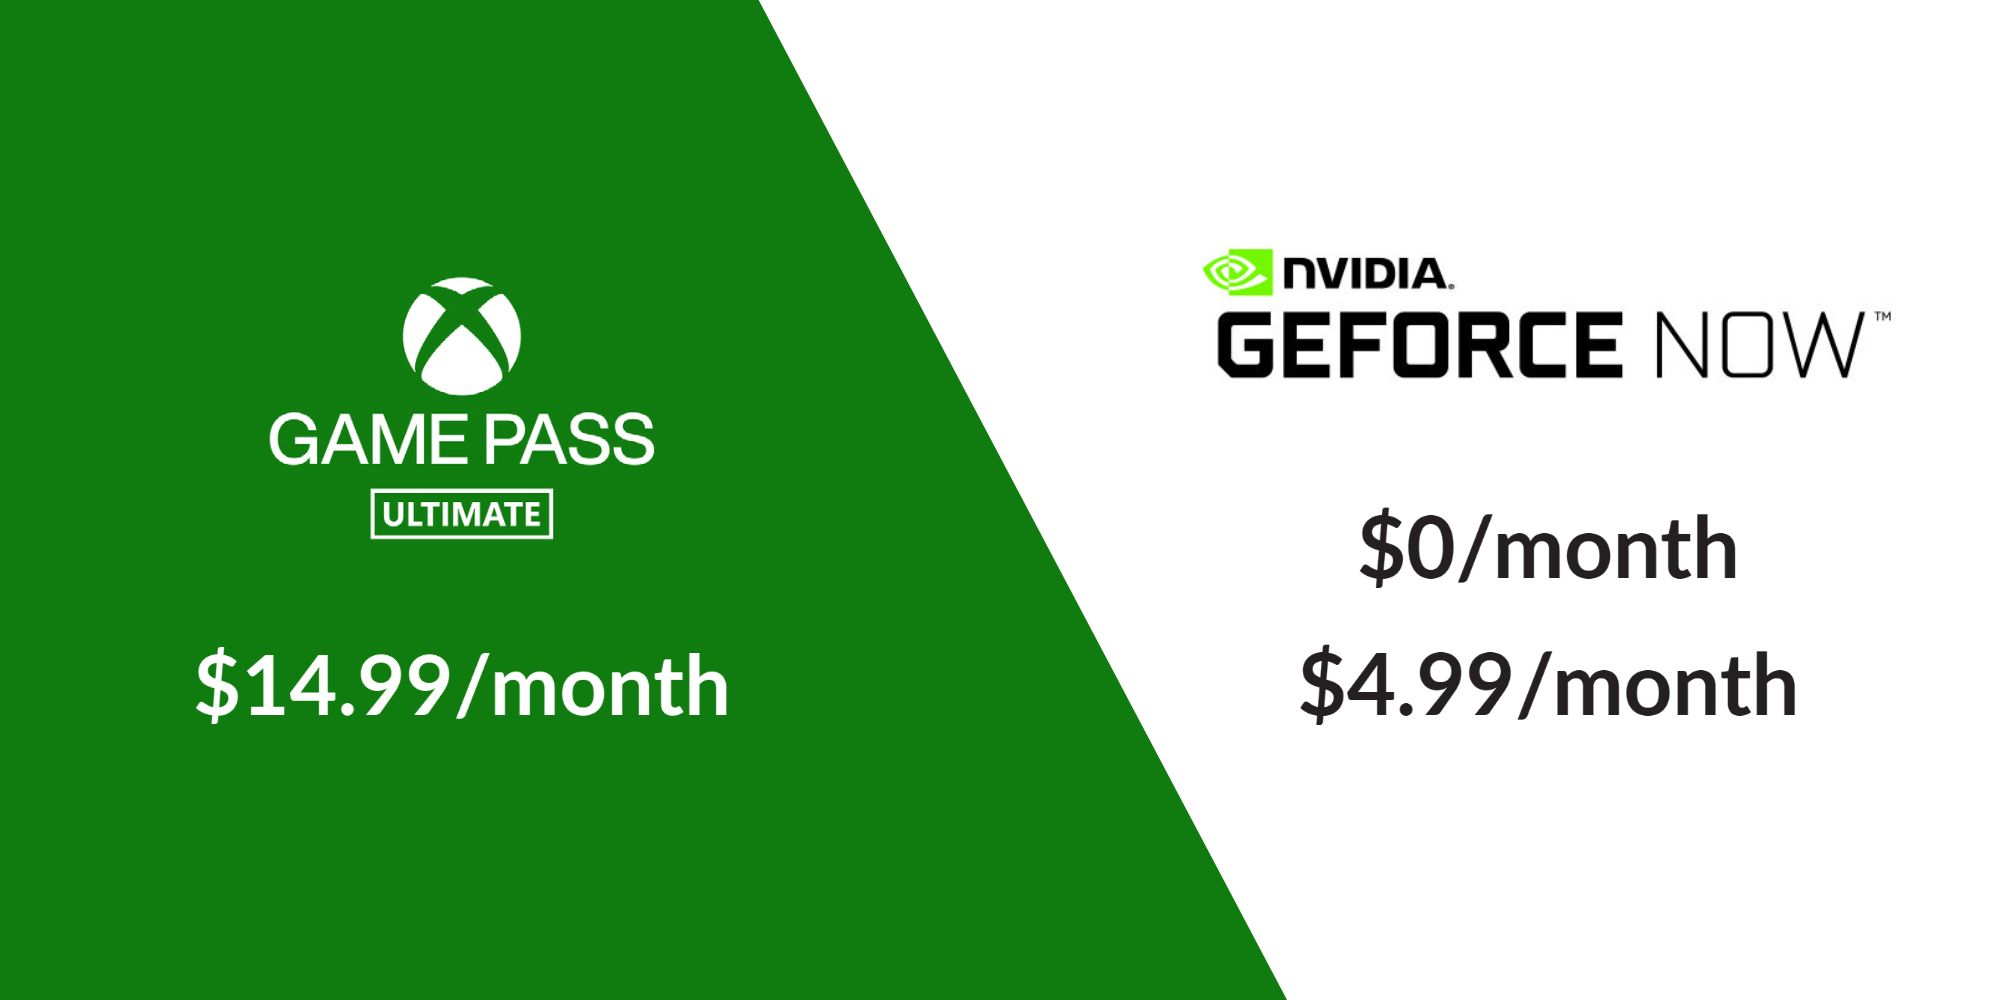 Game Pass vs Nvidia GeForce Now pricing